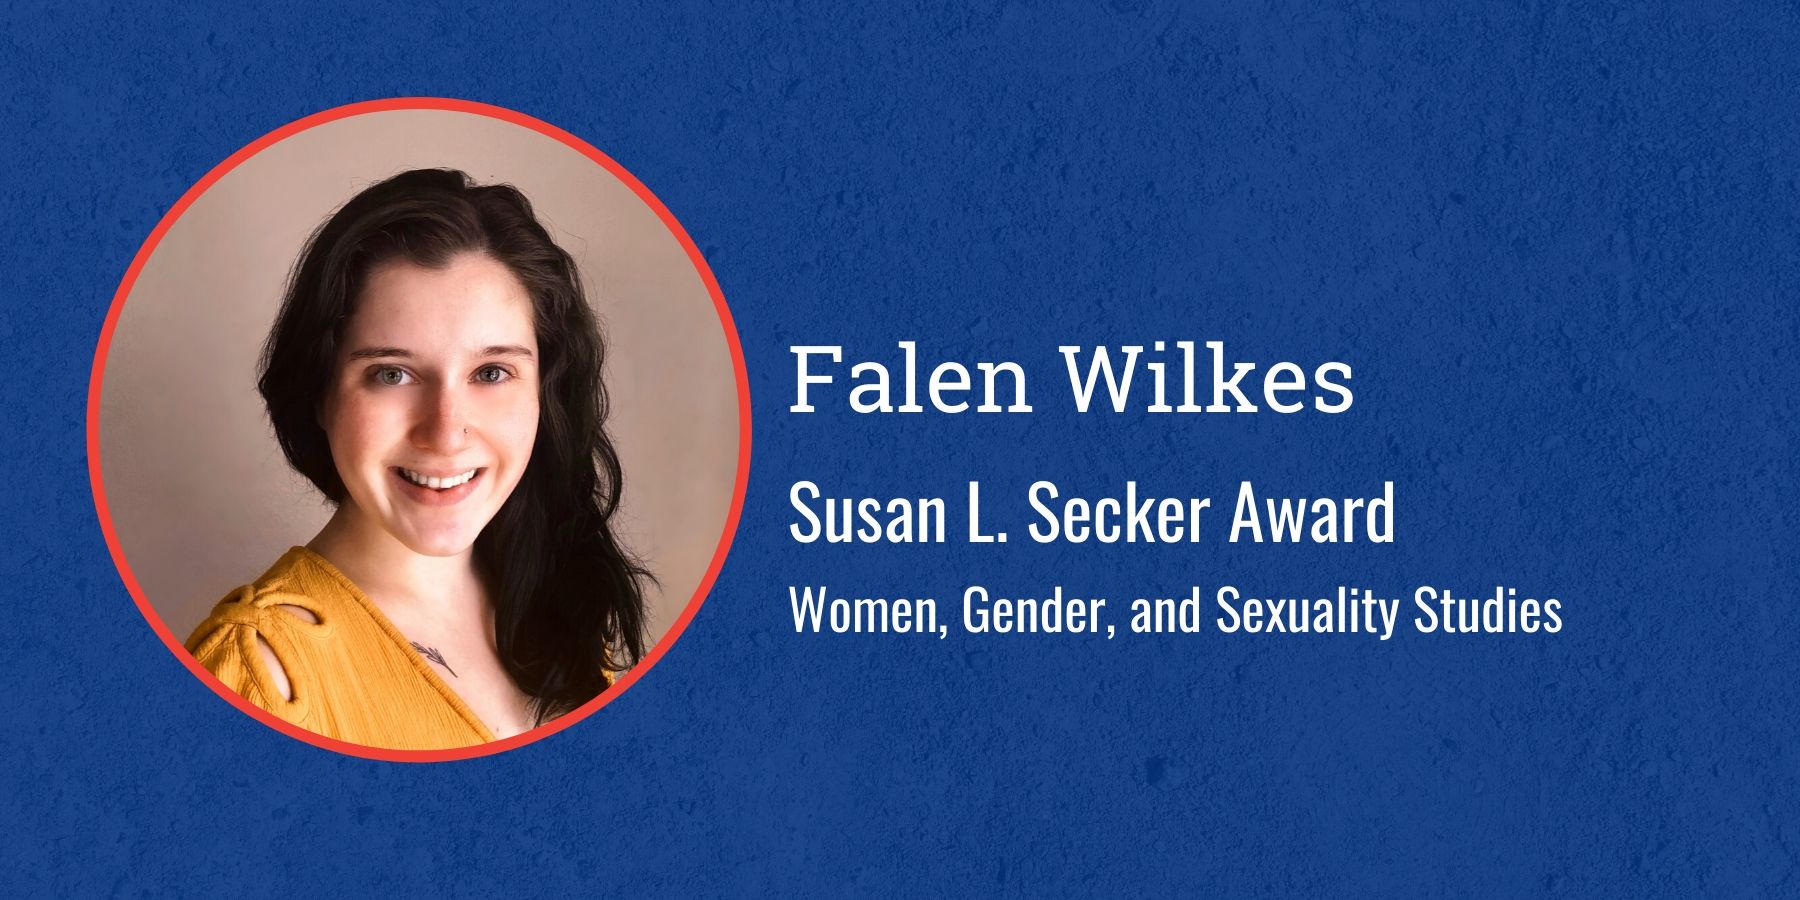 Photo of Falen Wilkes and text Susan L. Secker Award, Women, Gender, and Sexuality Studies